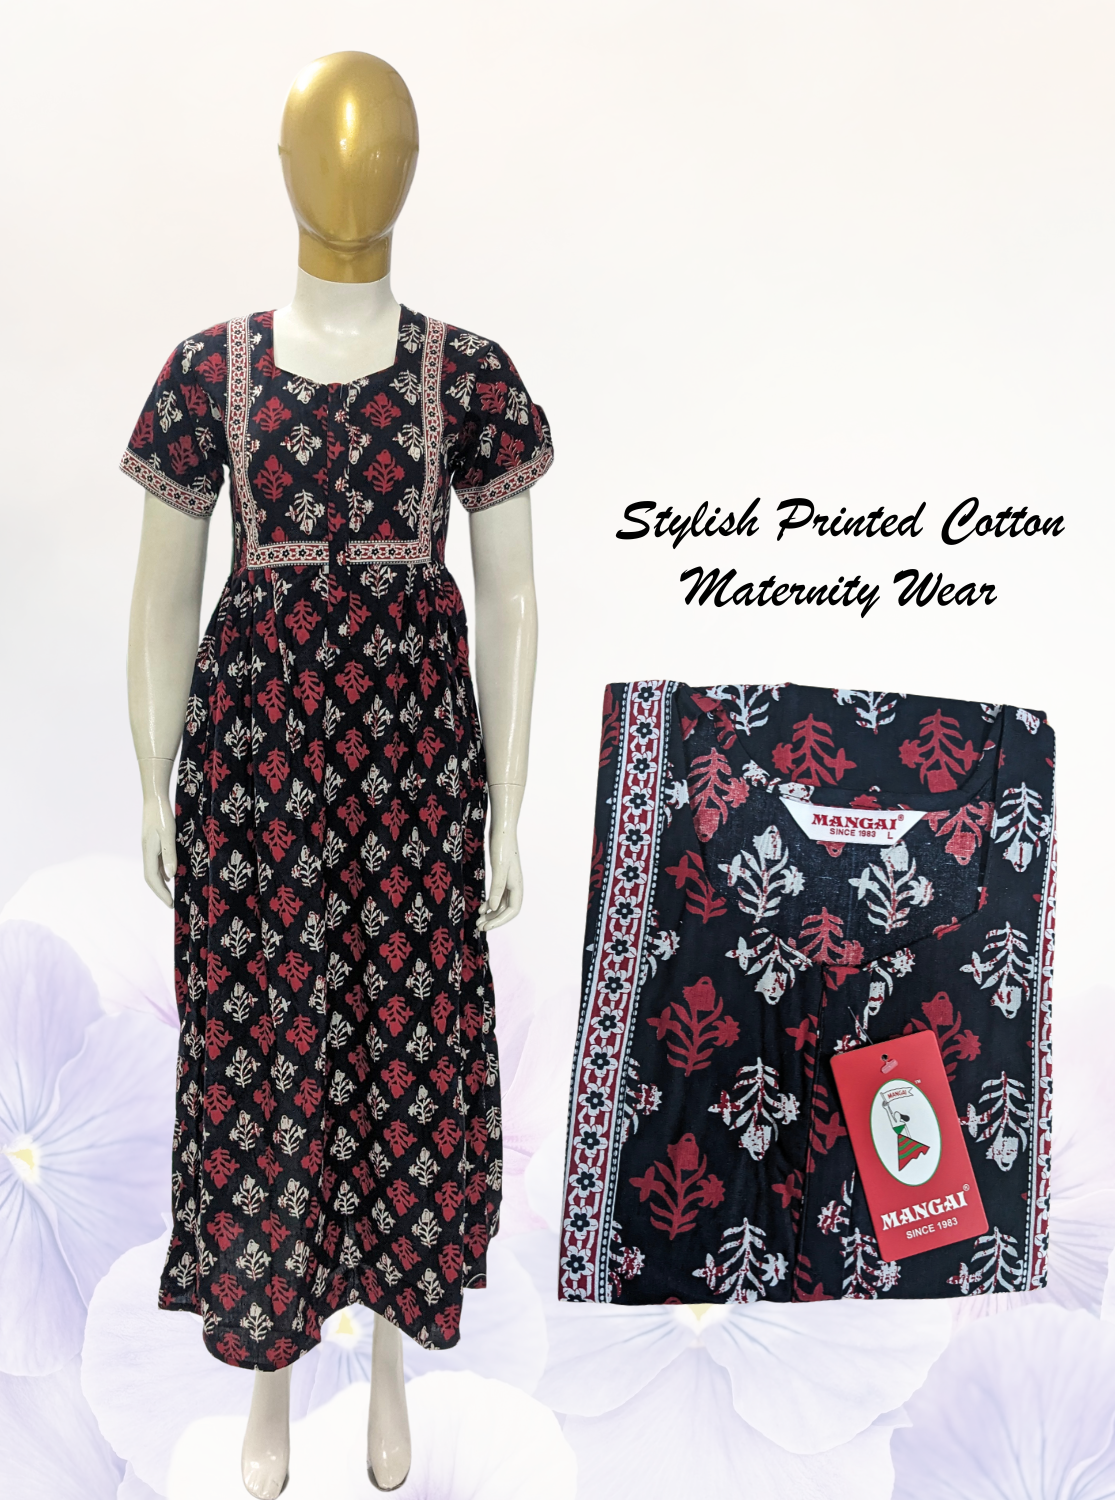 MANGAI Premium Cotton Maternity Wear for Pregnancy Women's | Soft Cotton | Above Knee Length Covered | Front Open Zipper| Beautiful Printed Maternity Wear